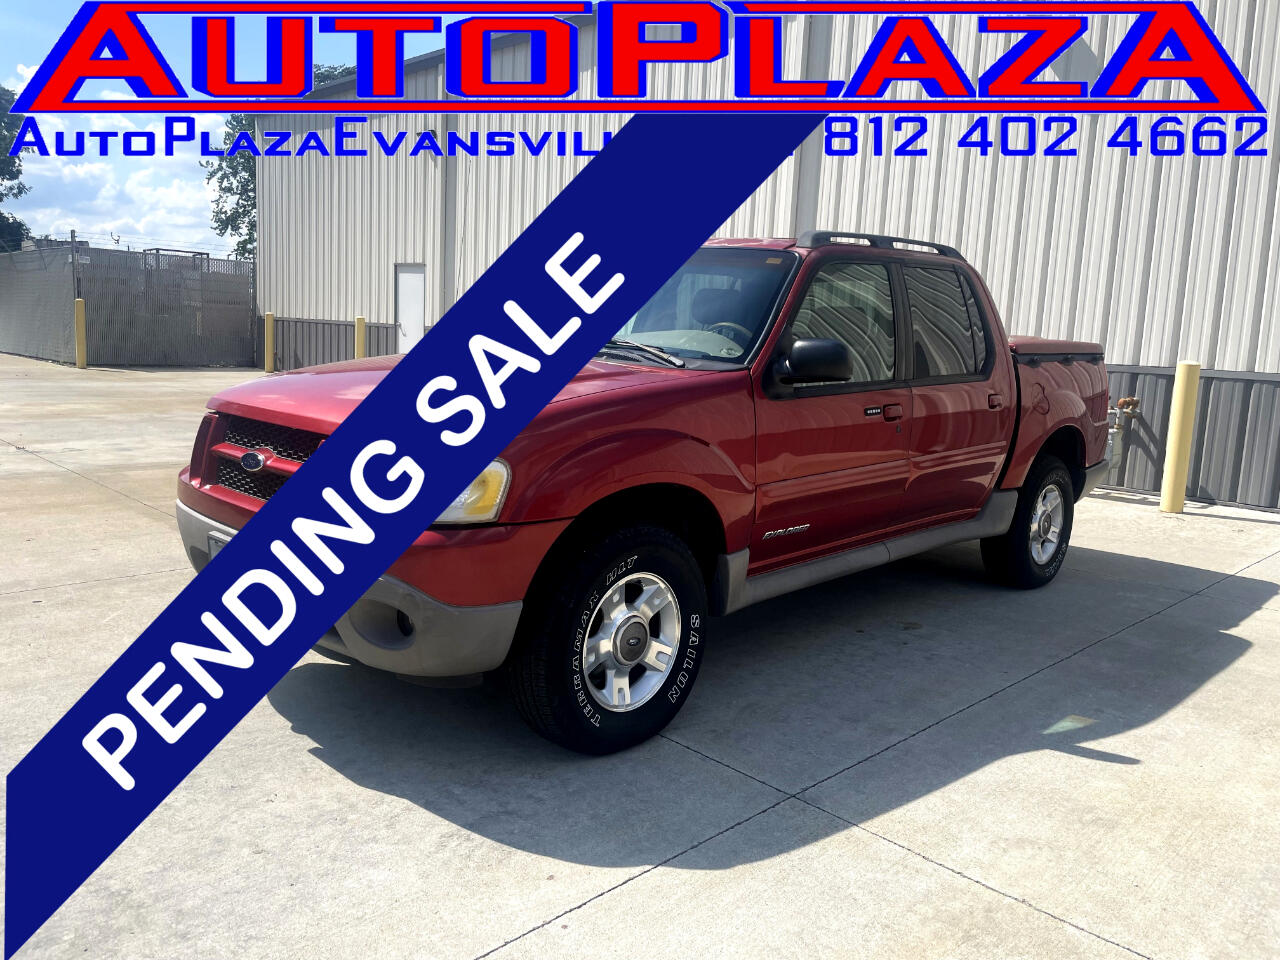 Ford Explorer Sport Trac 4WD Value - 200A 2002